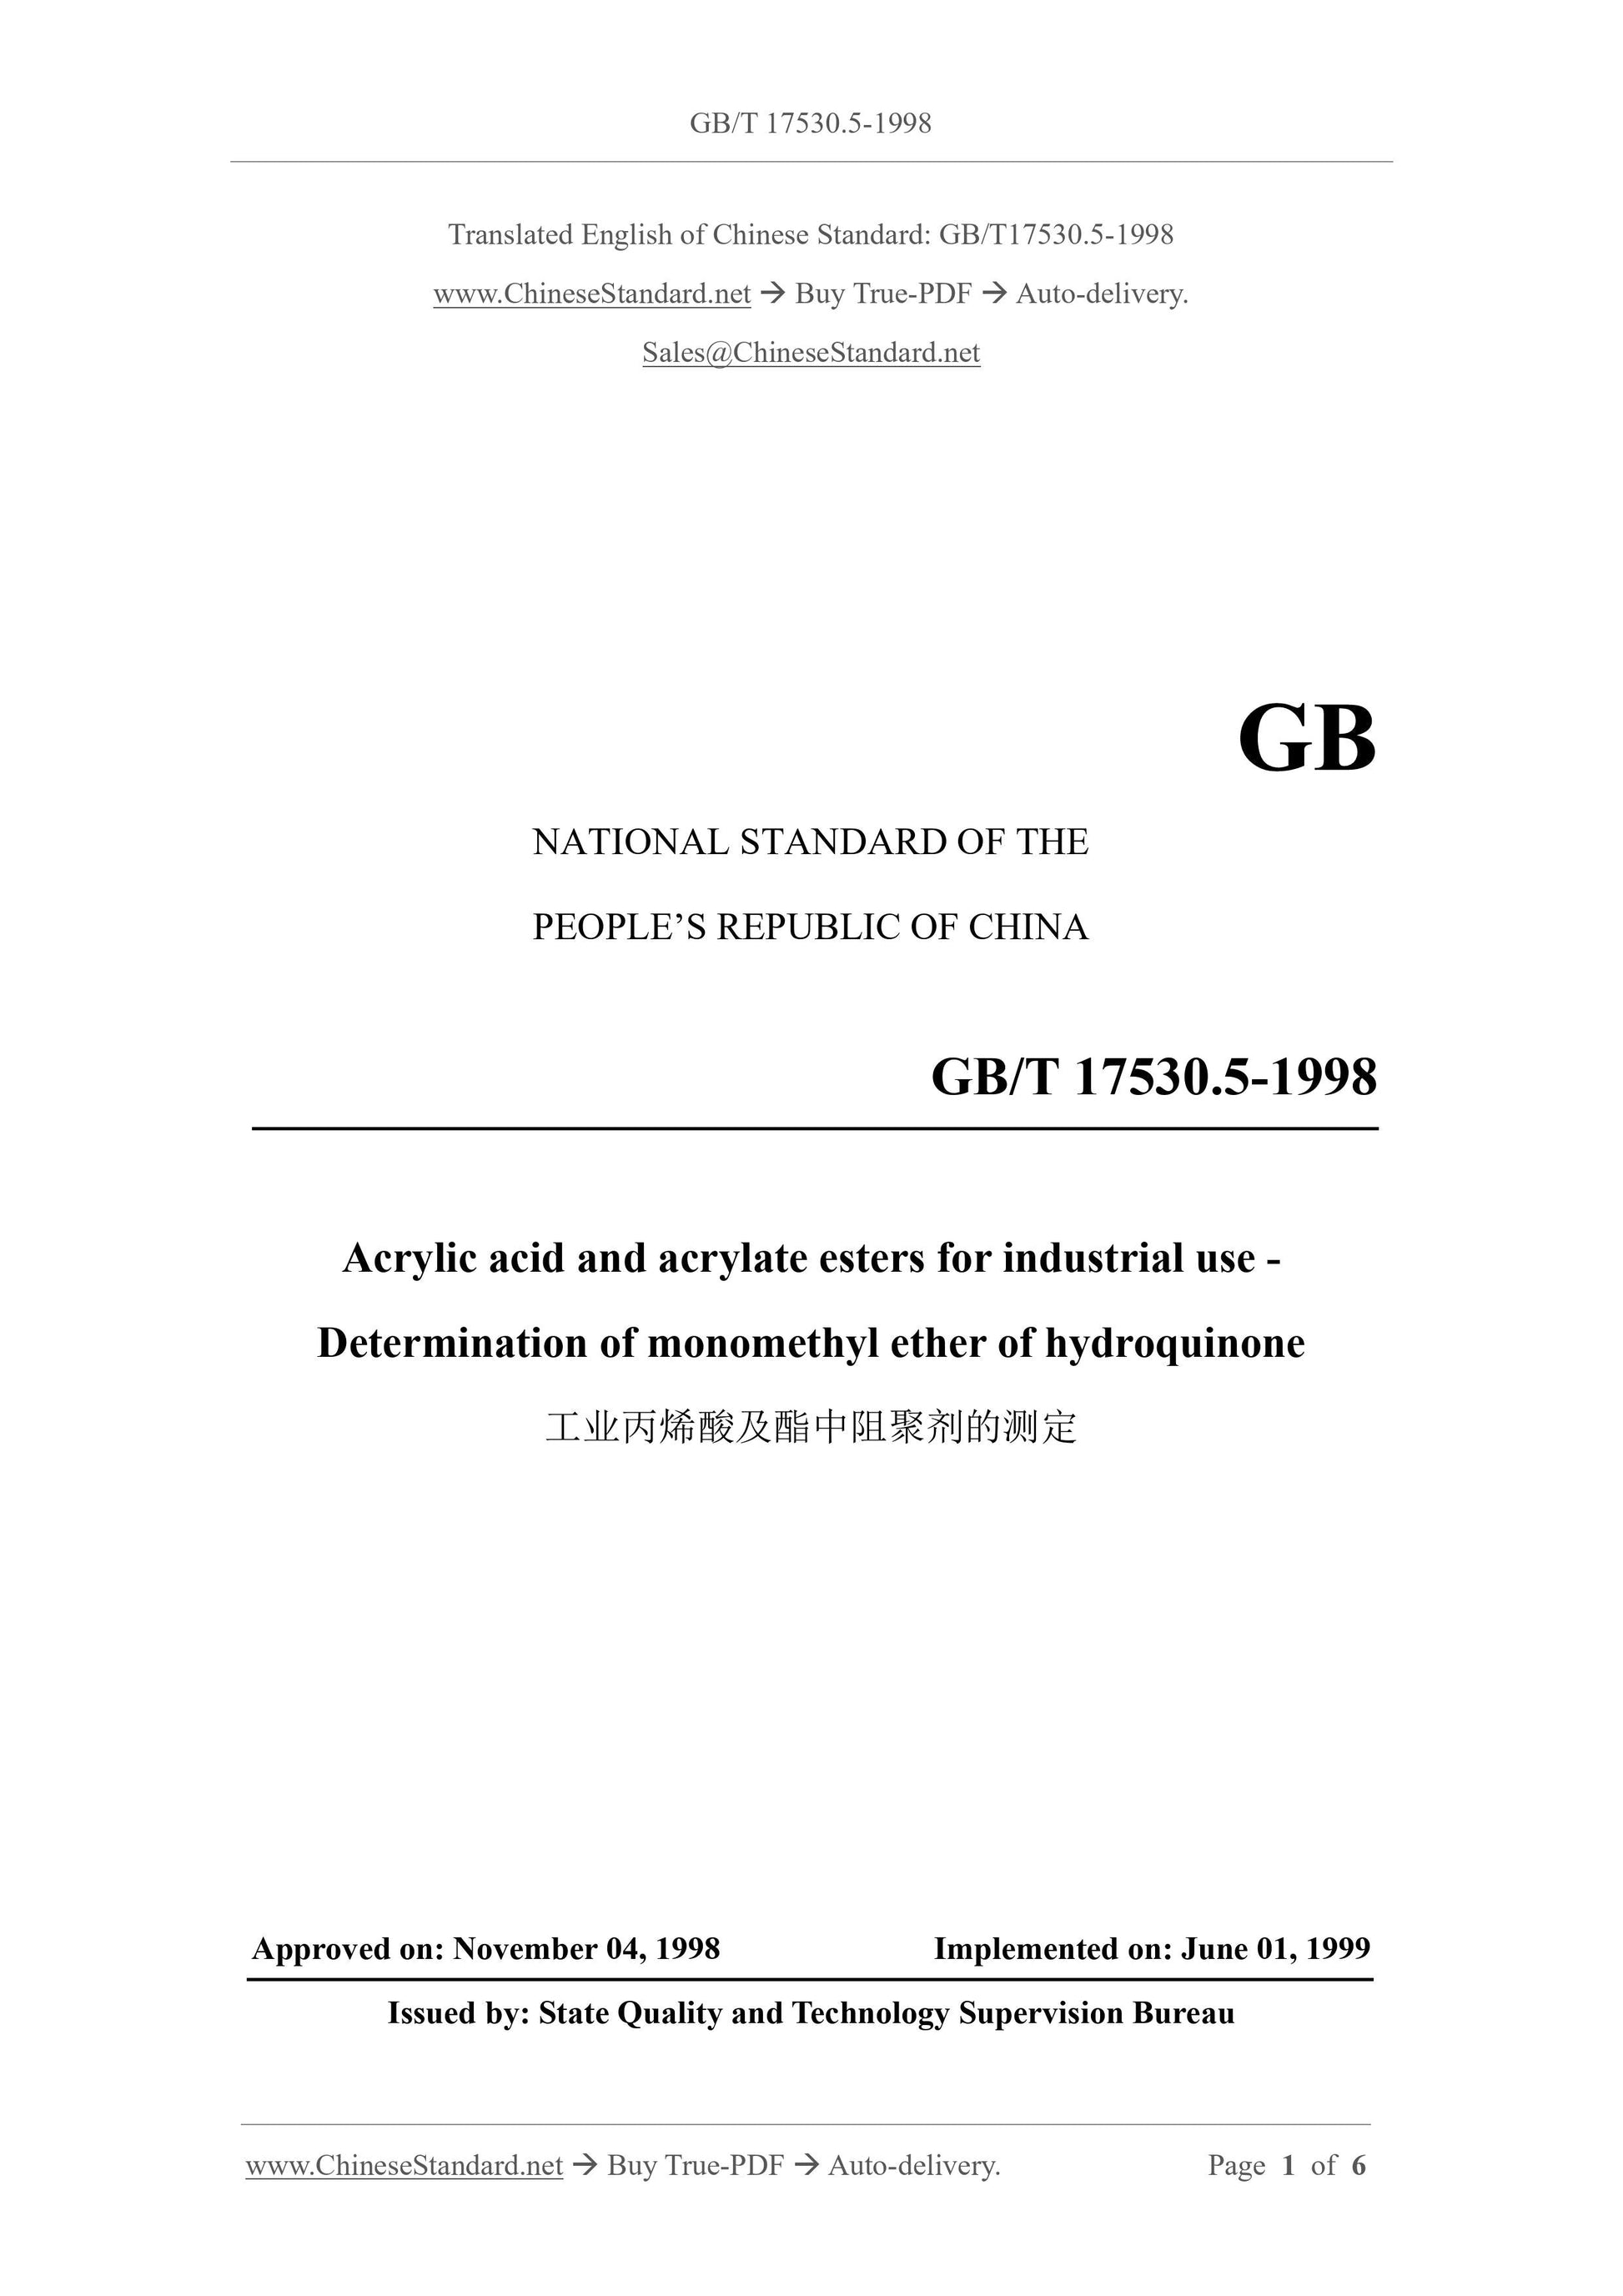 GB/T 17530.5-1998 Page 1